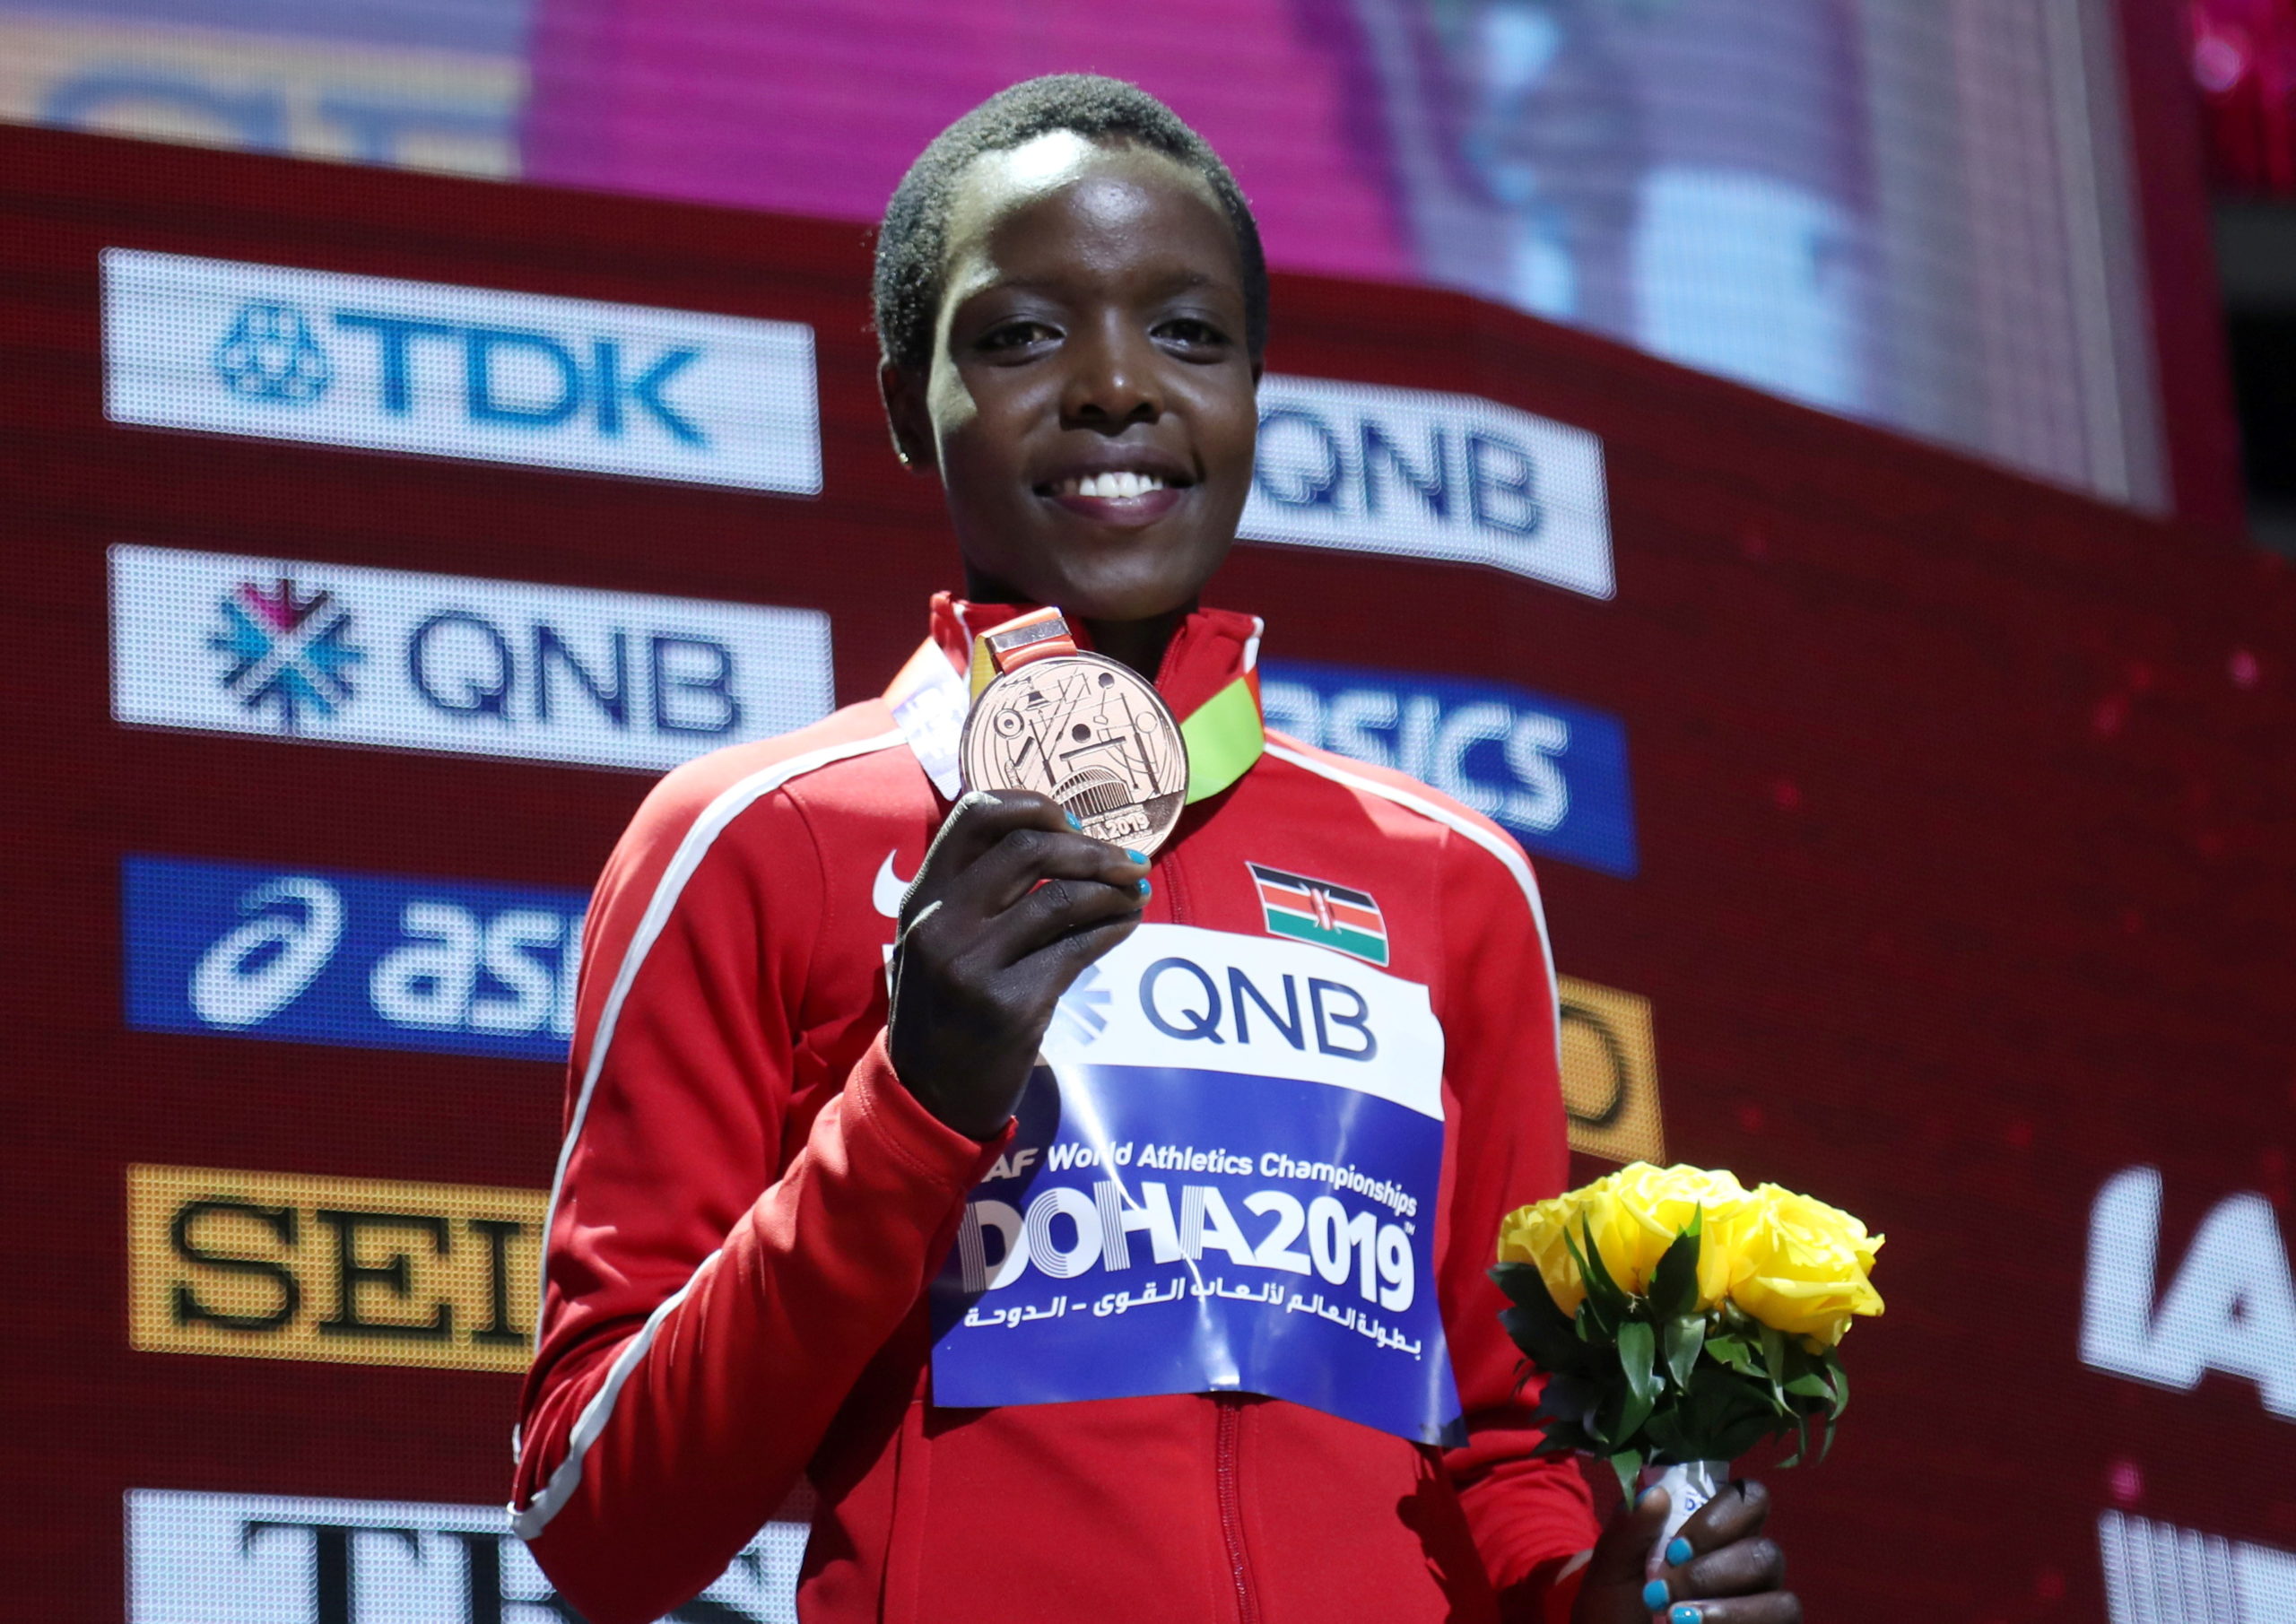 Ibrahim Rotich, the husband of slain Kenyan Olympic runner Agnes Tirop, was charged with her murder and pleaded not guilty in a Kenyan court on Tuesday.